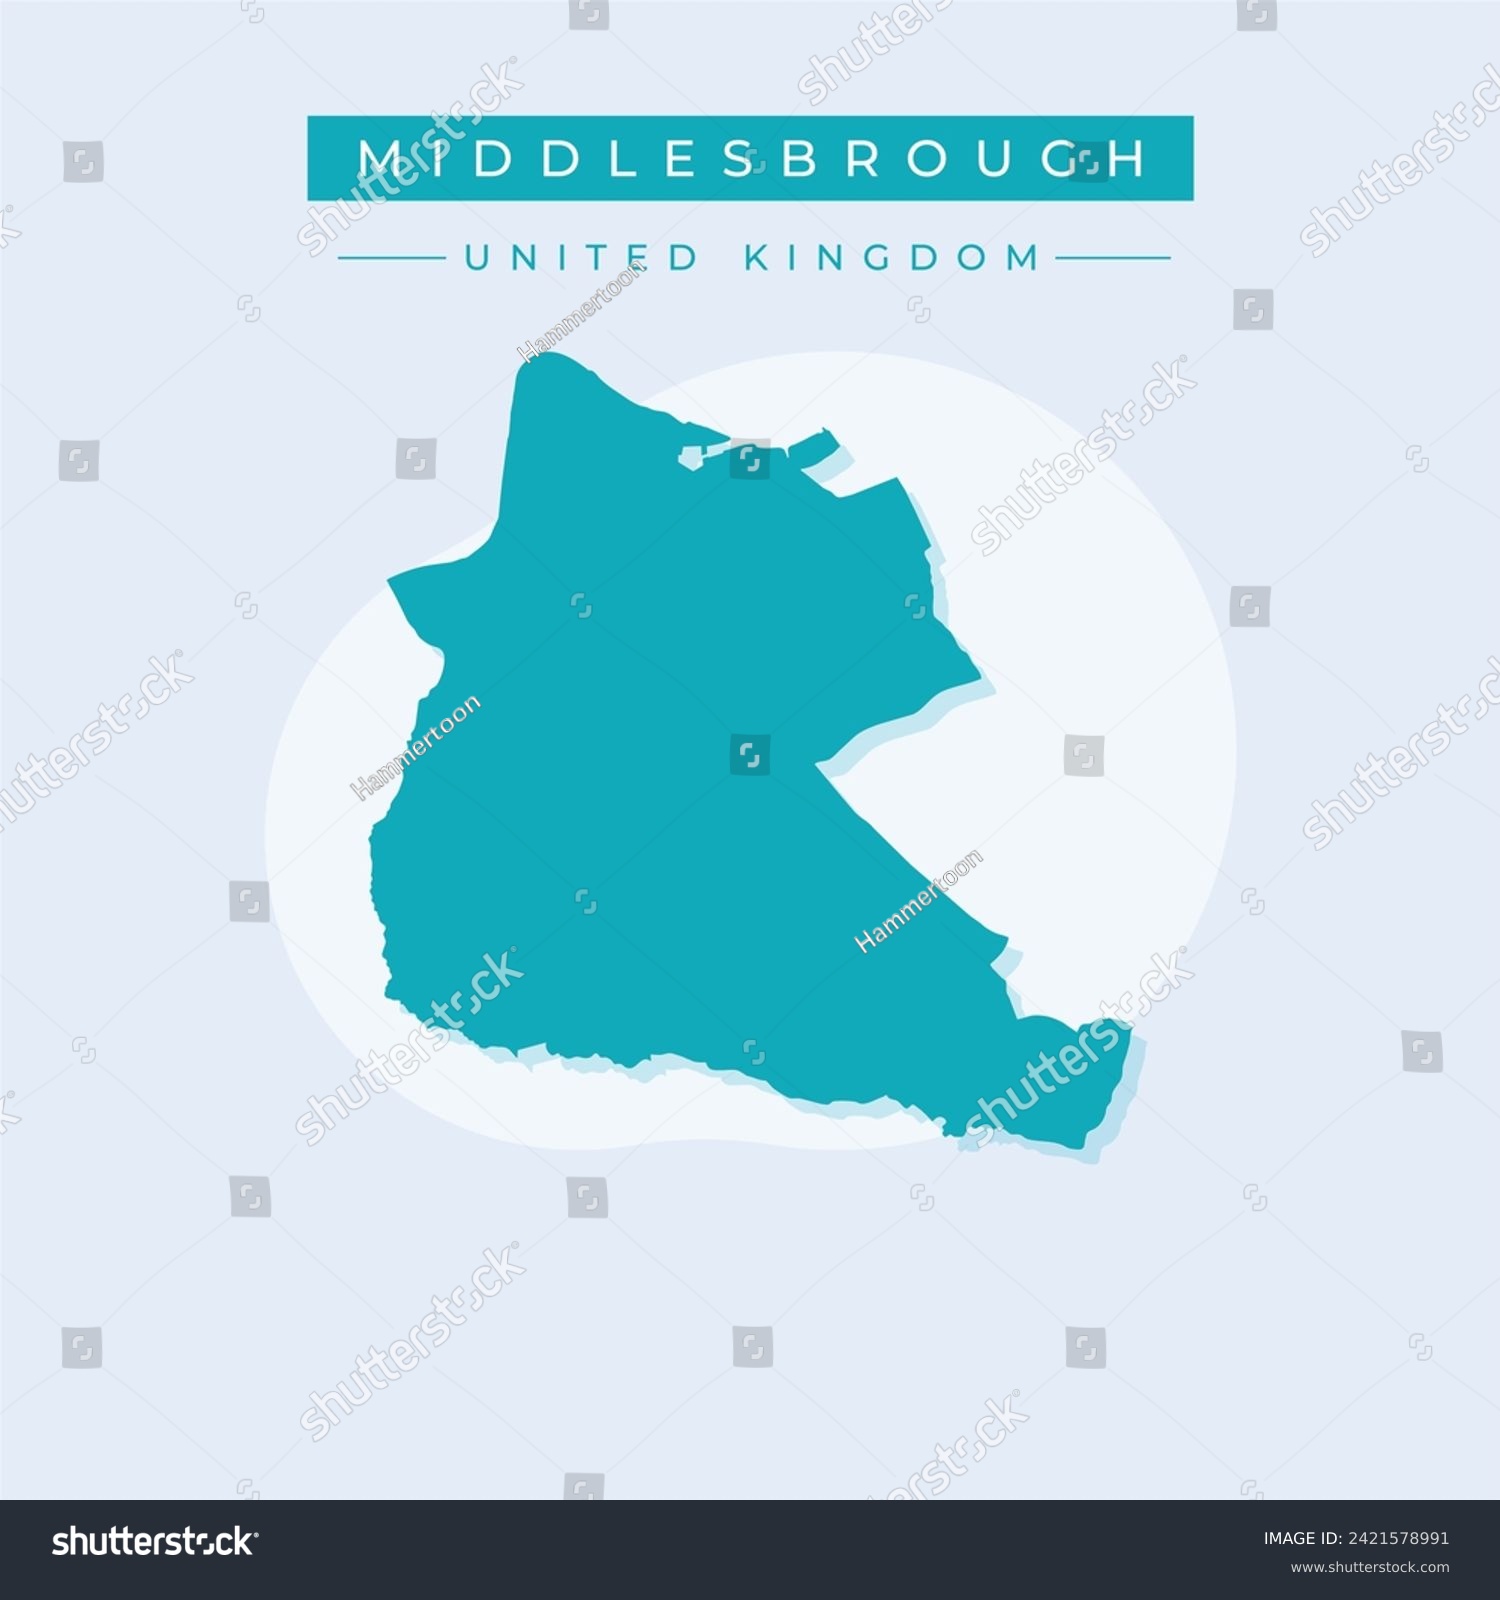 SVG of Middlesbrough Borough with unitary authority status (United Kingdom of Great Britain and Northern Ireland, ceremonial county North Yorkshire, England) map vector illustration, scribble sketch map svg